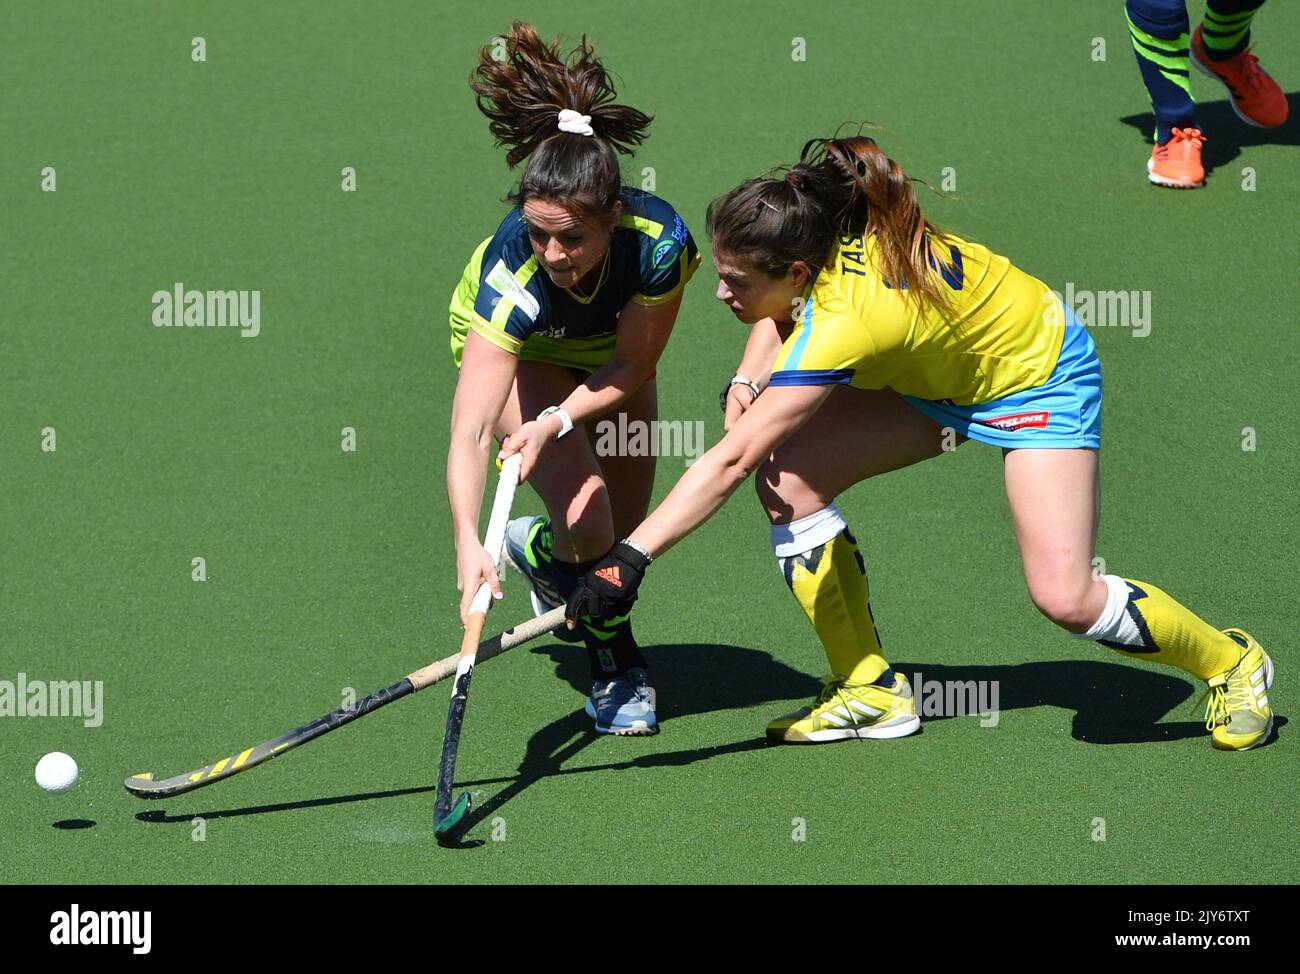 RE-TRANSMISSION OF IMAGE ID: 20191020001427666881 TO CORRECT NAME**  Canberra Chill Tina Taseka (R) and Tassie Tigers Amelia Spence compete for  the ball during their Round 5, Hockey One Womenâ€™s match between Canberra